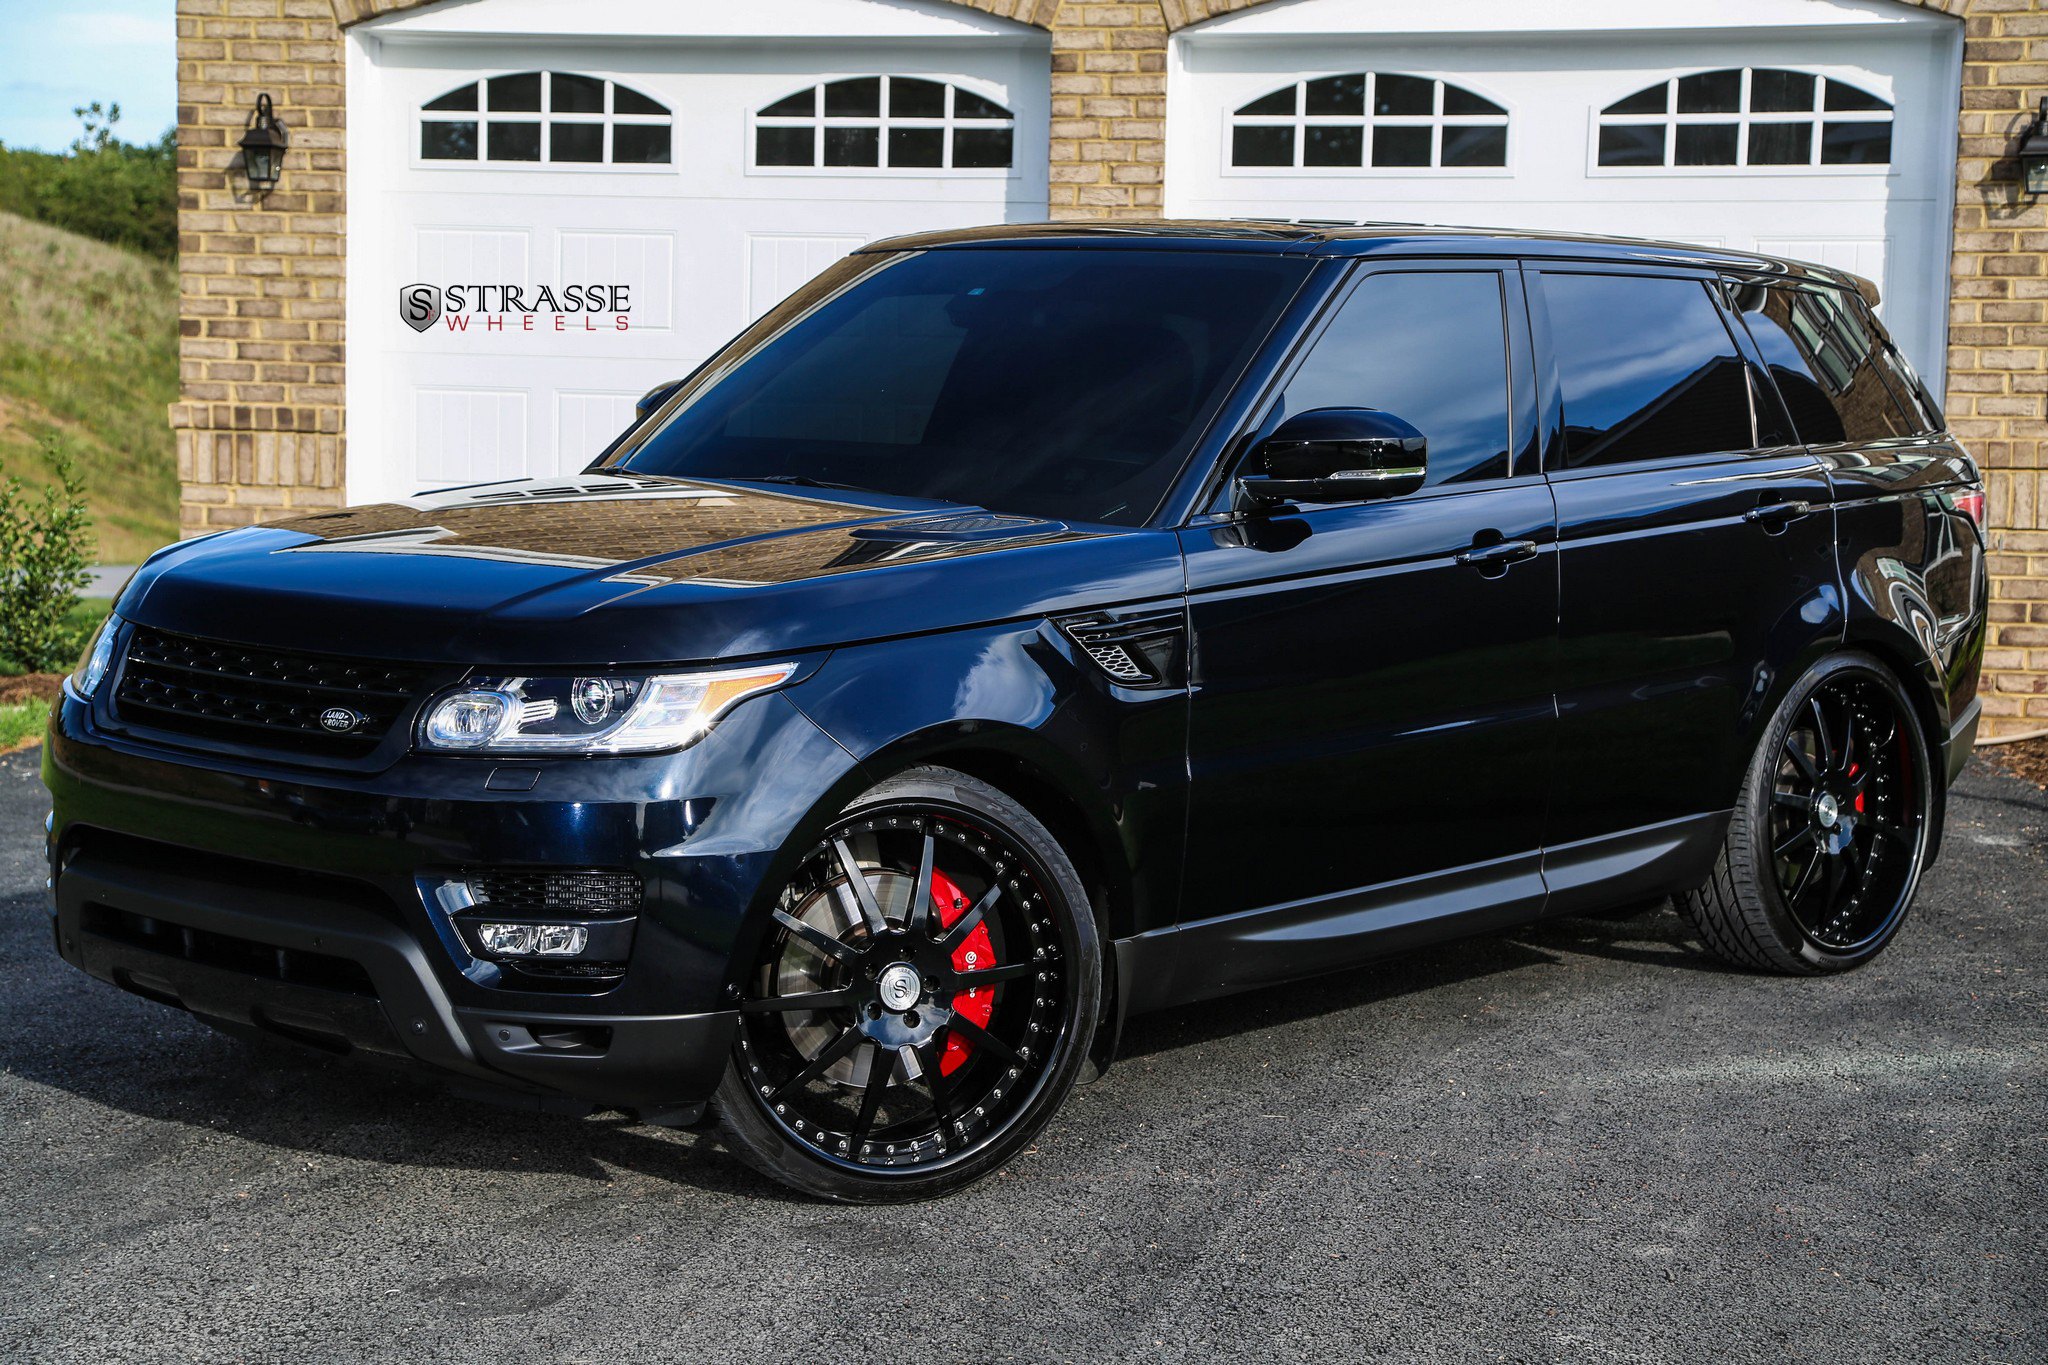 Range Rover Sport with Blacked Out Mesh Grille - Photo by Strasse Forged